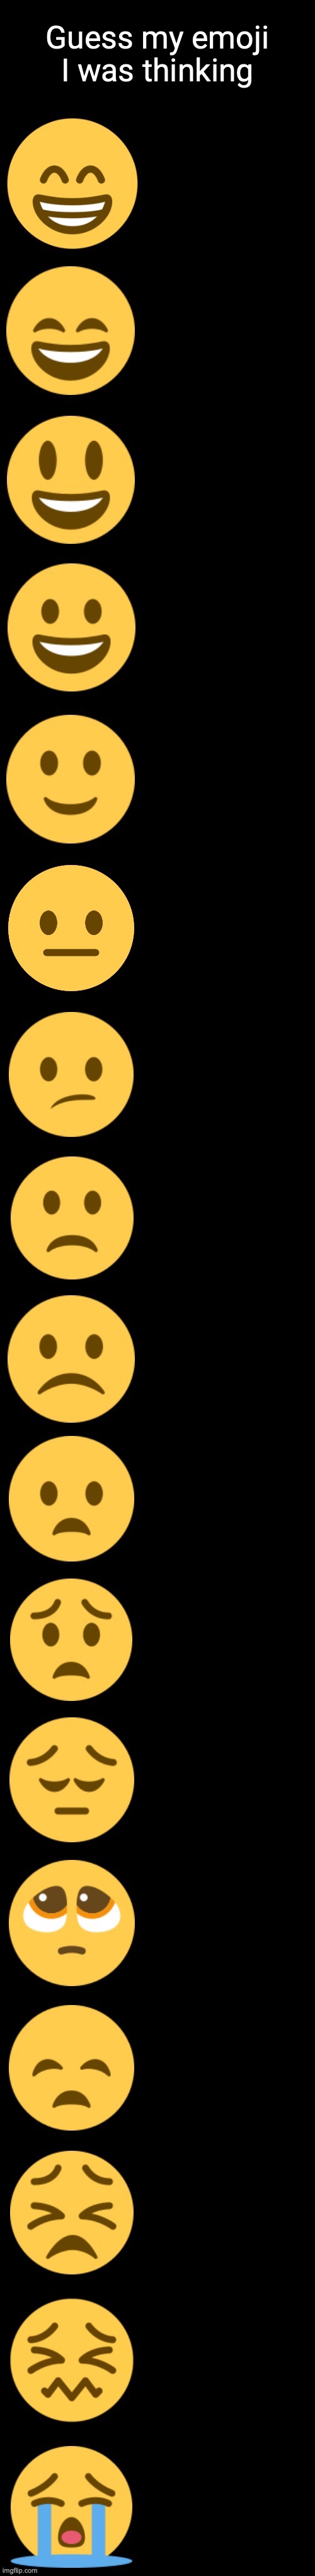 Everyone go guess. | Guess my emoji I was thinking | image tagged in emoji becoming sad extended | made w/ Imgflip meme maker